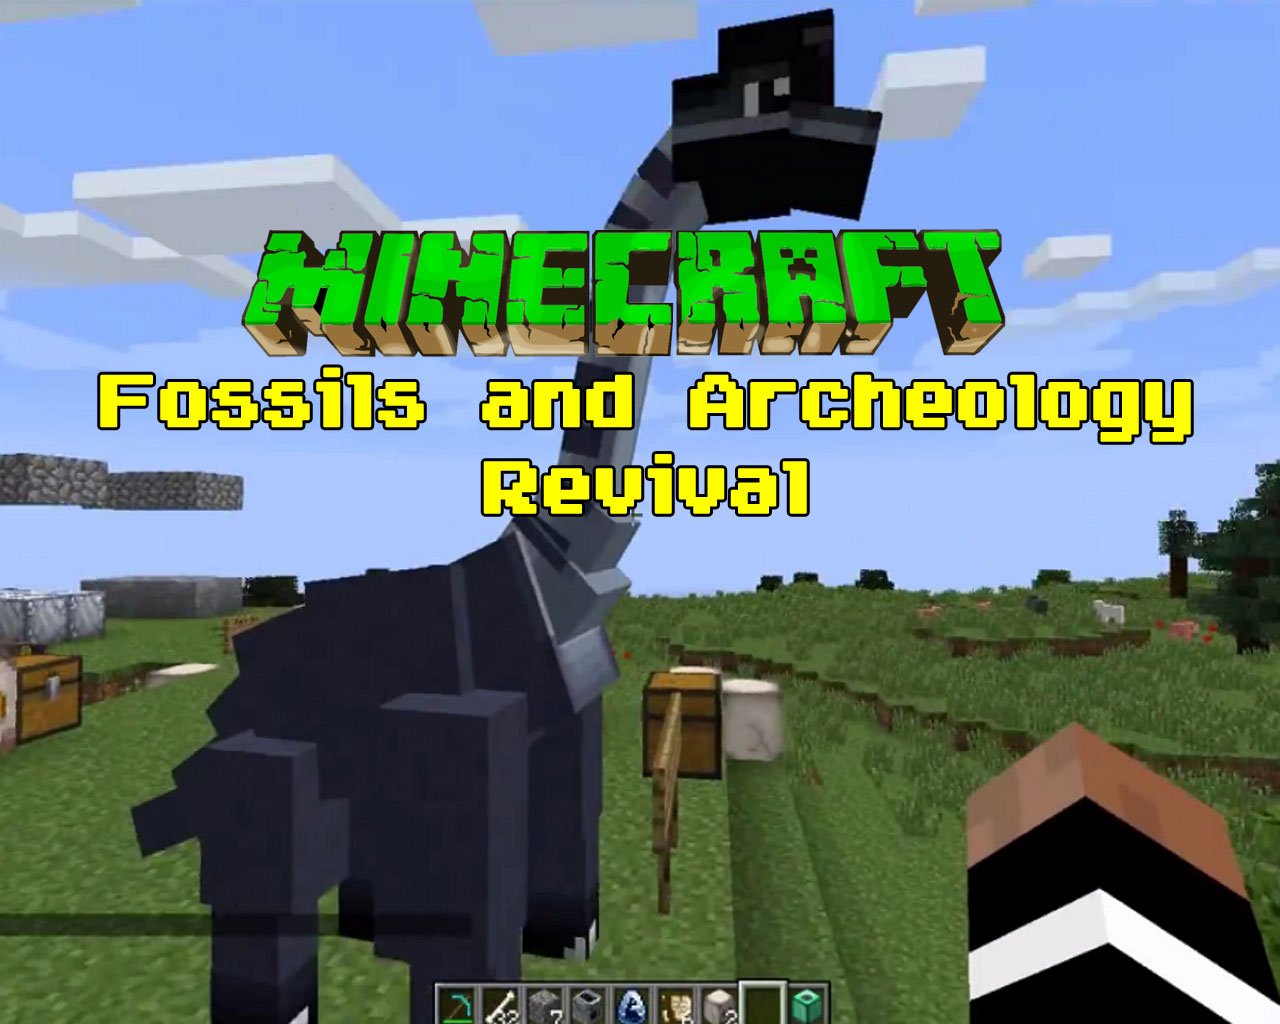 Fossils and Archeology Revival Mod 1.12.2/1.7.10